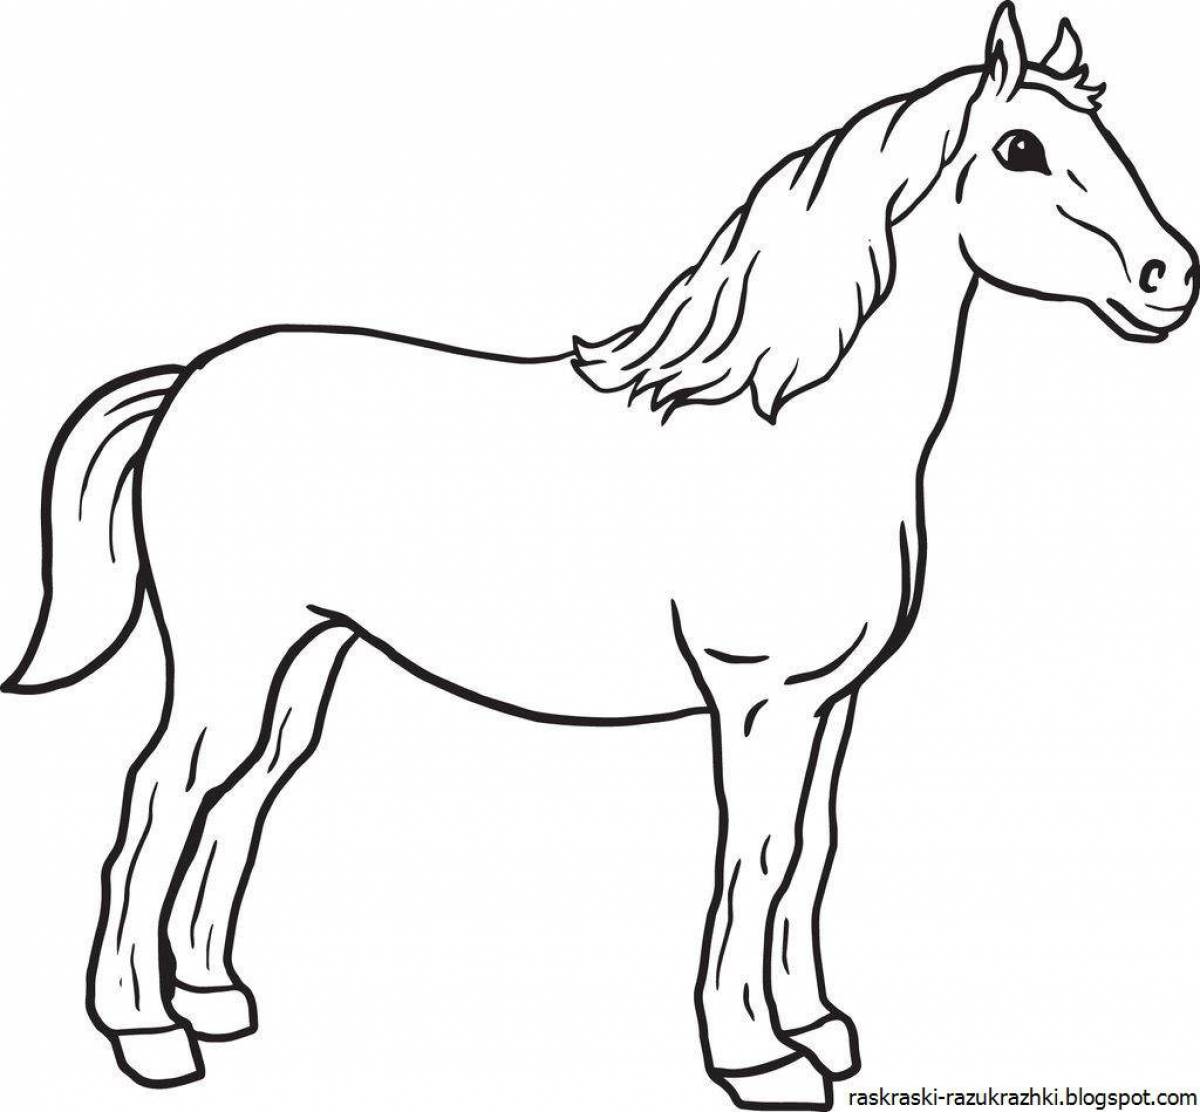 Coloring horse for kids